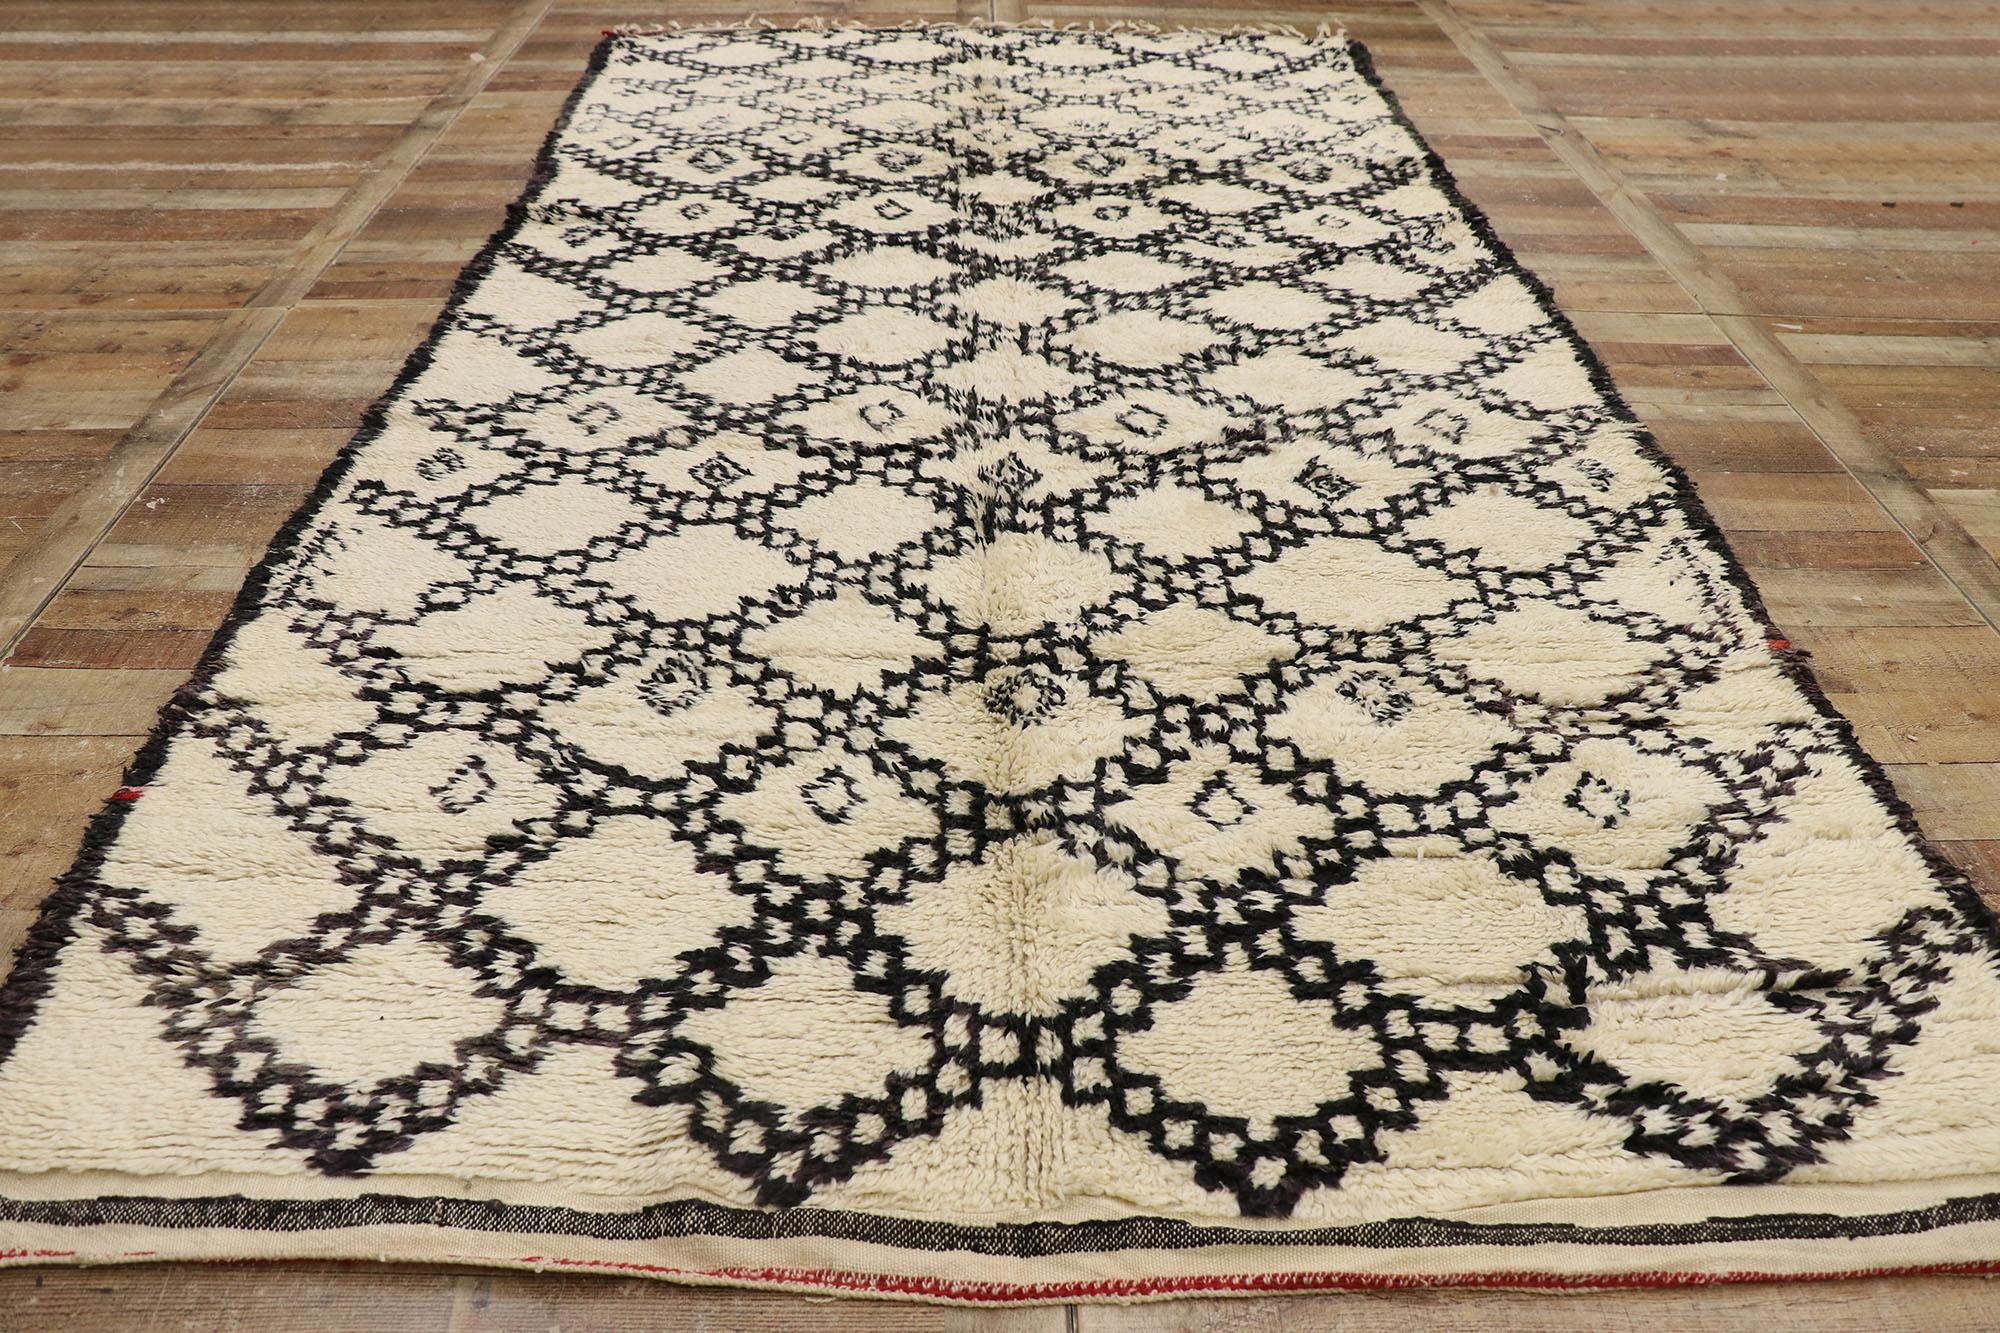 Vintage Berber Beni Ourain Moroccan Rug with Mid-Century Modern Style For Sale 1